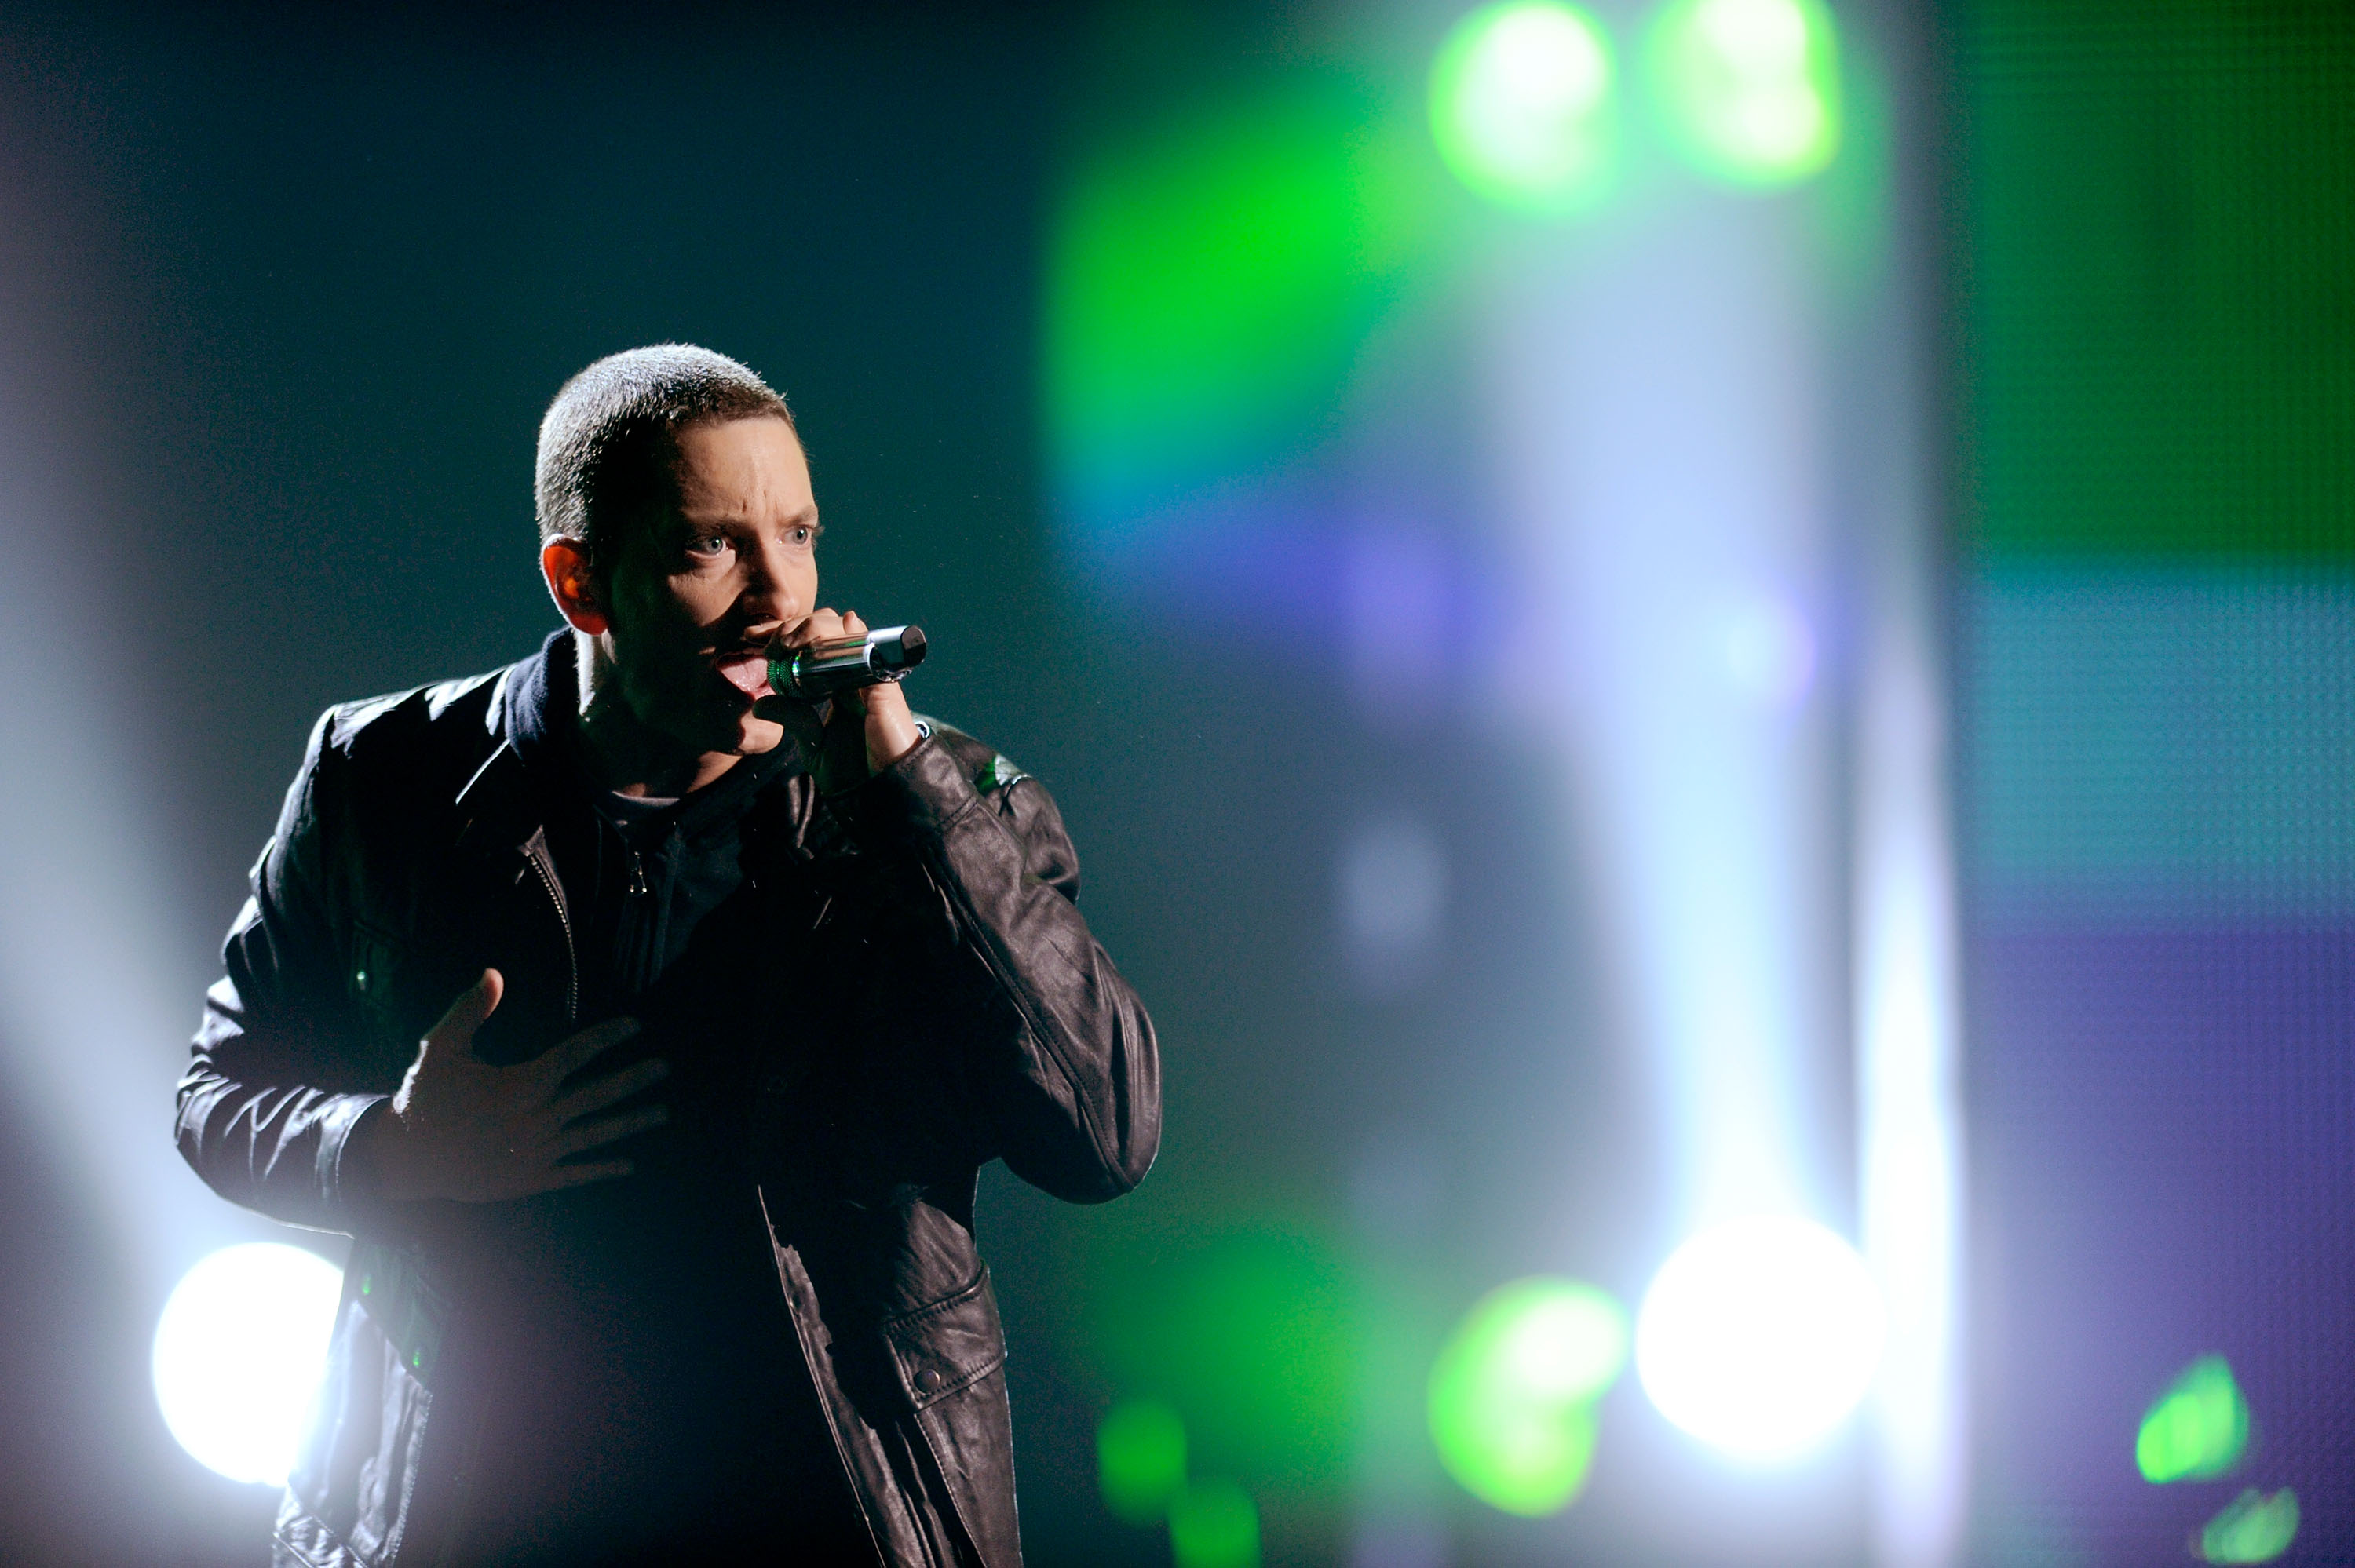 Eminem onstage at the 2010 BET Awards in Los Angeles, California. | Source: Getty Images